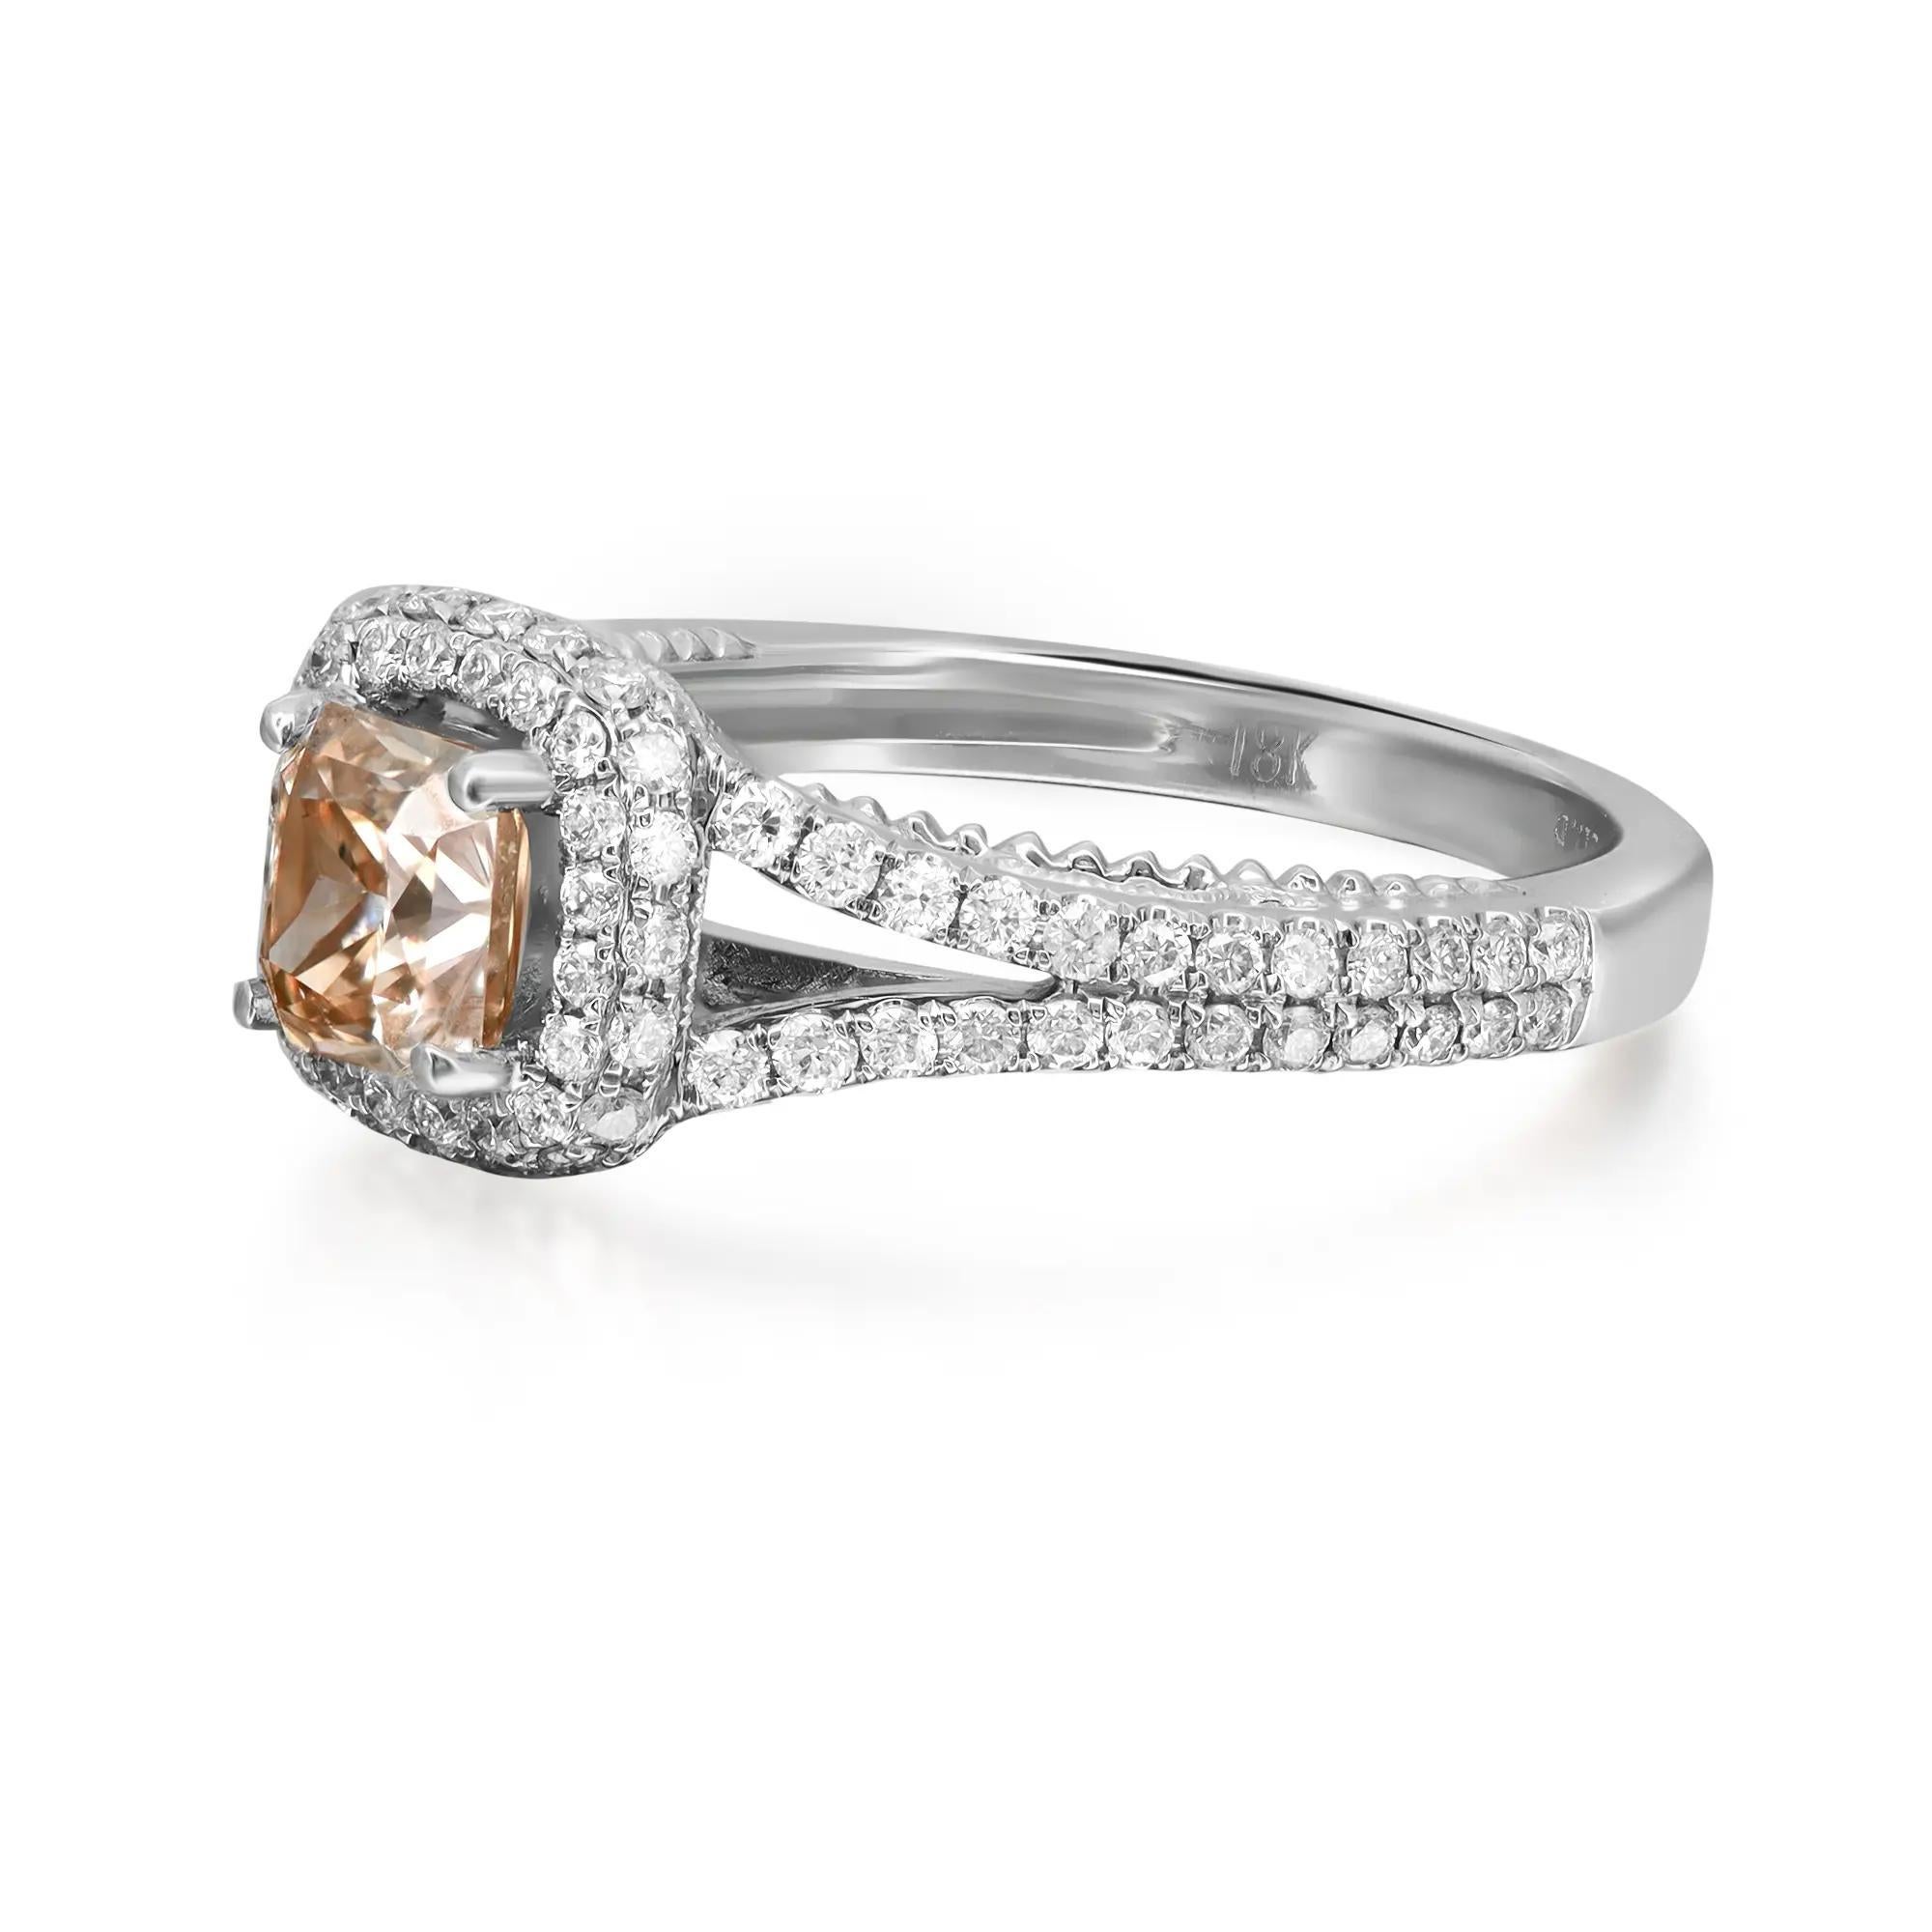 This stunning engagement ring comes with a flashy statement look. A must have in your jewelry collection. The ring is crafted in 18K white gold. Showcases a prong set cushion cut brown diamond in the center weighing 1.00 carat, accented with round